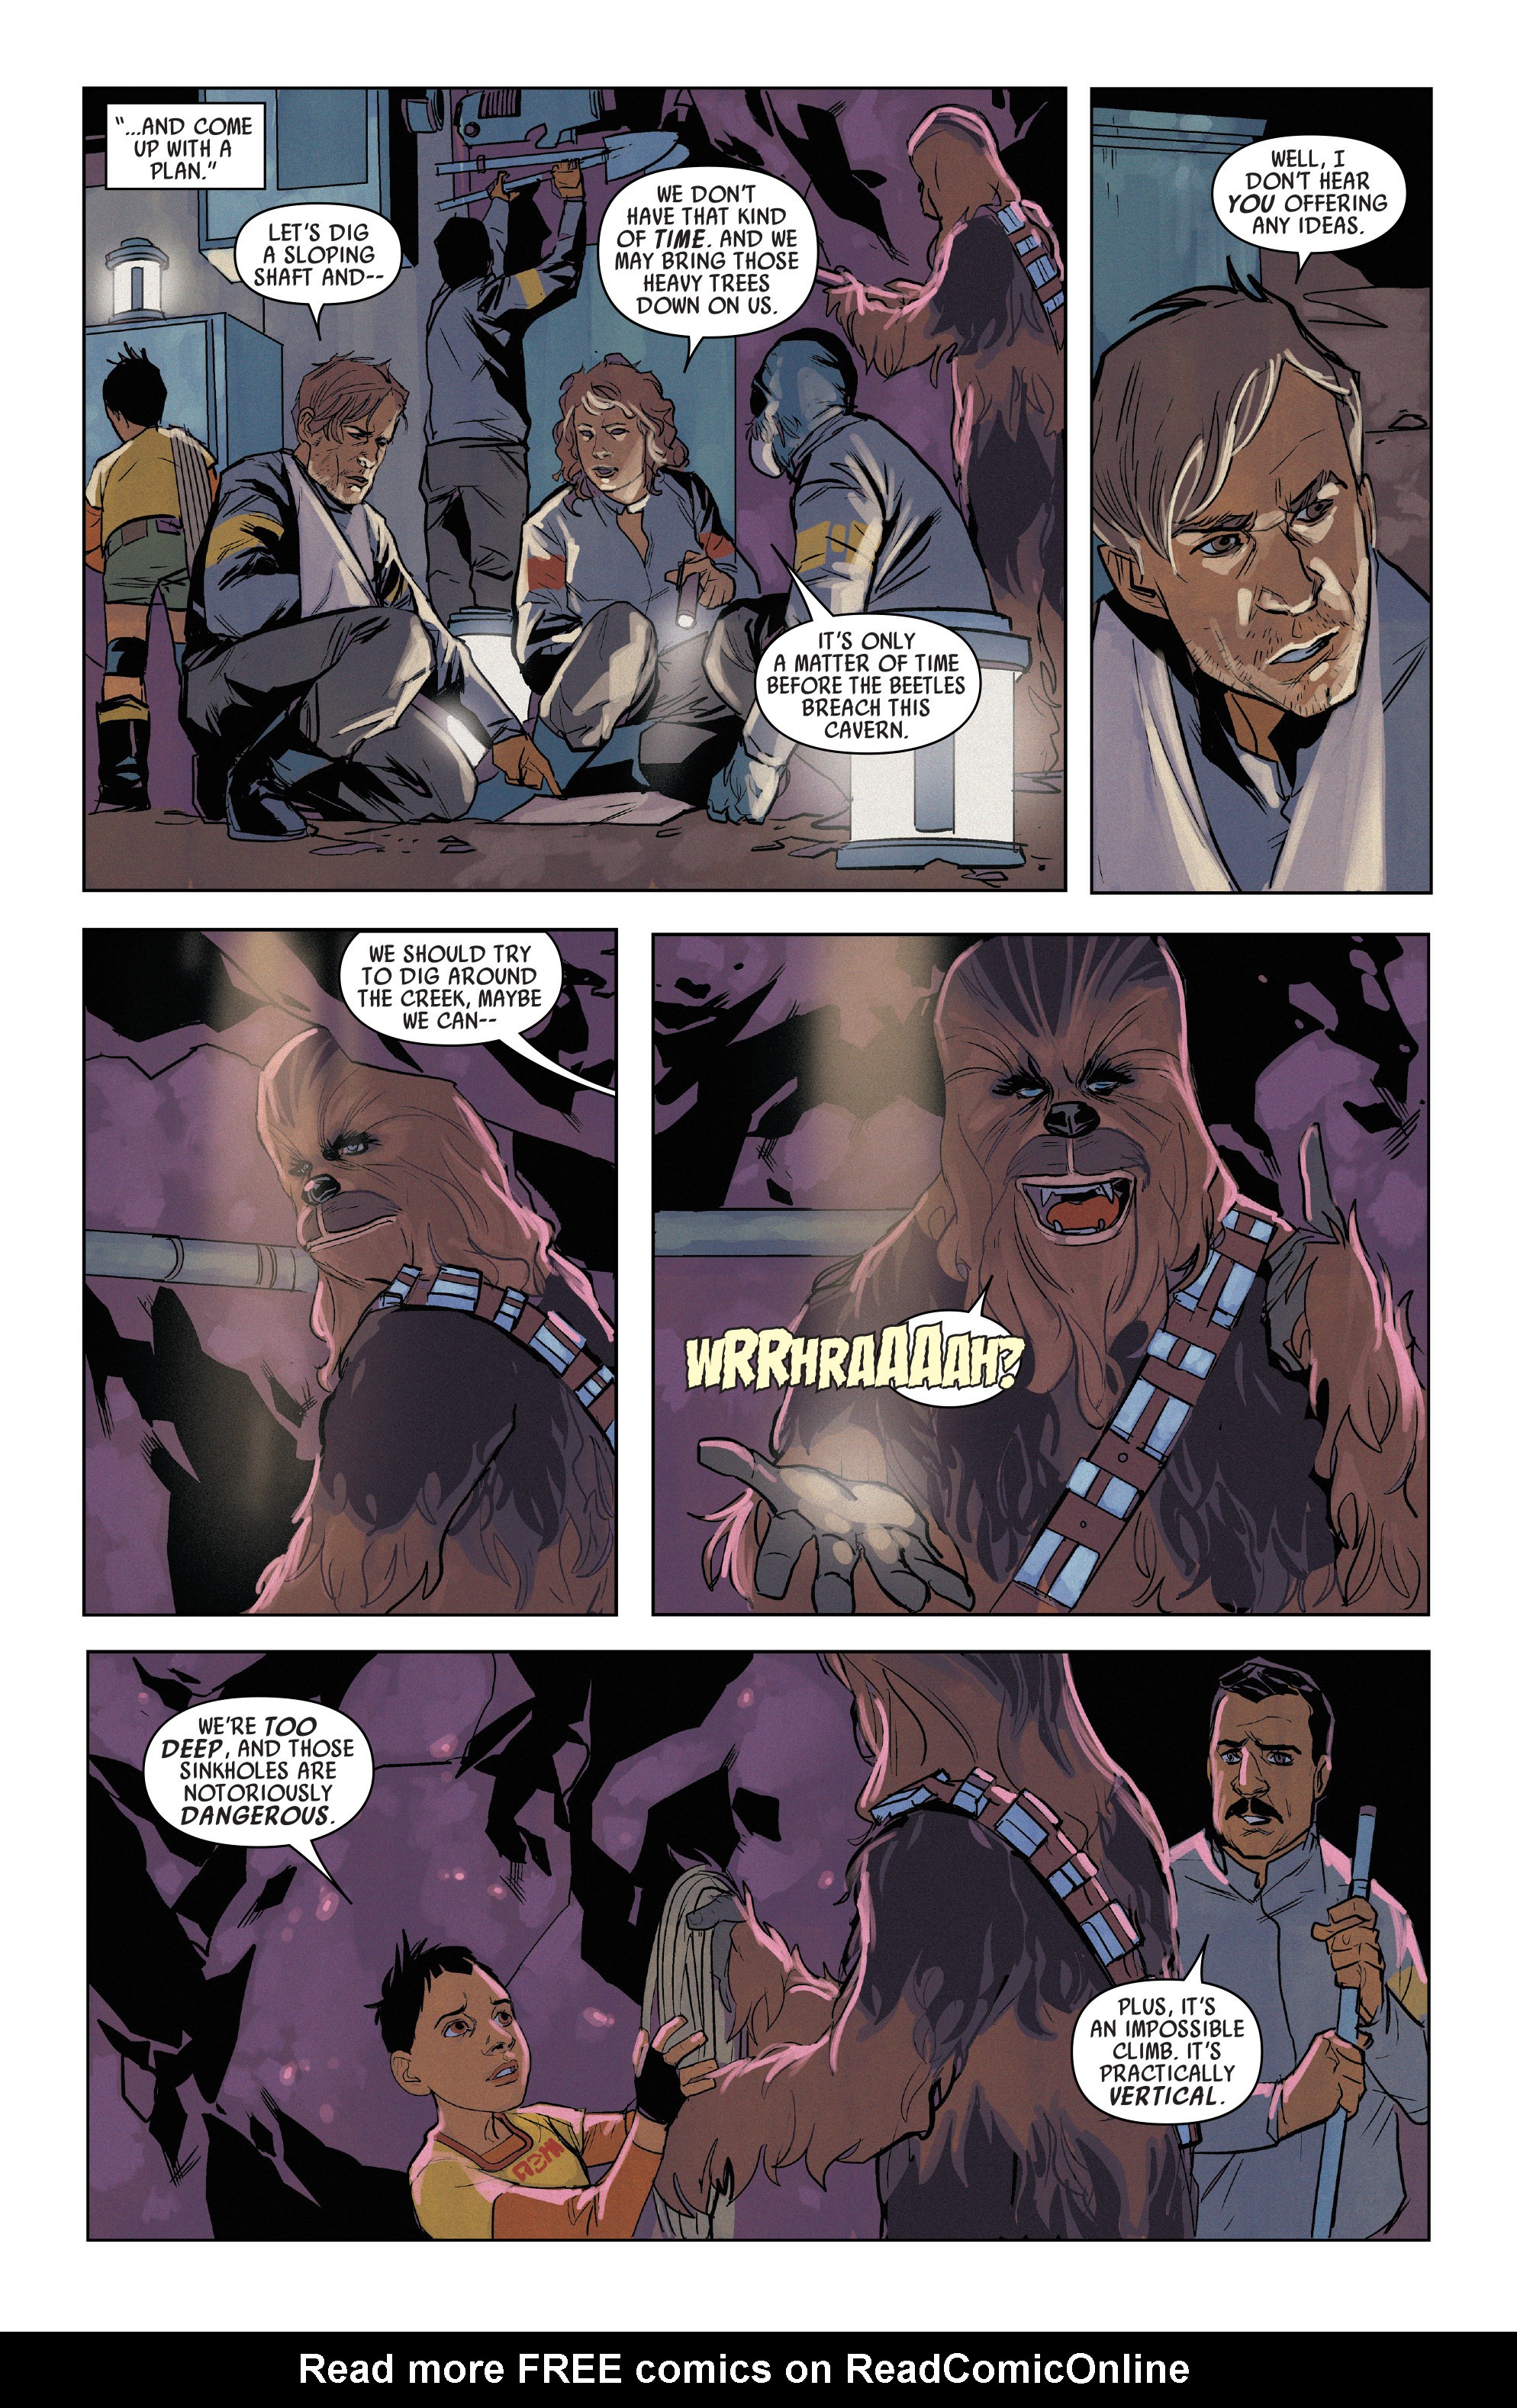 Read online Chewbacca comic -  Issue #3 - 9